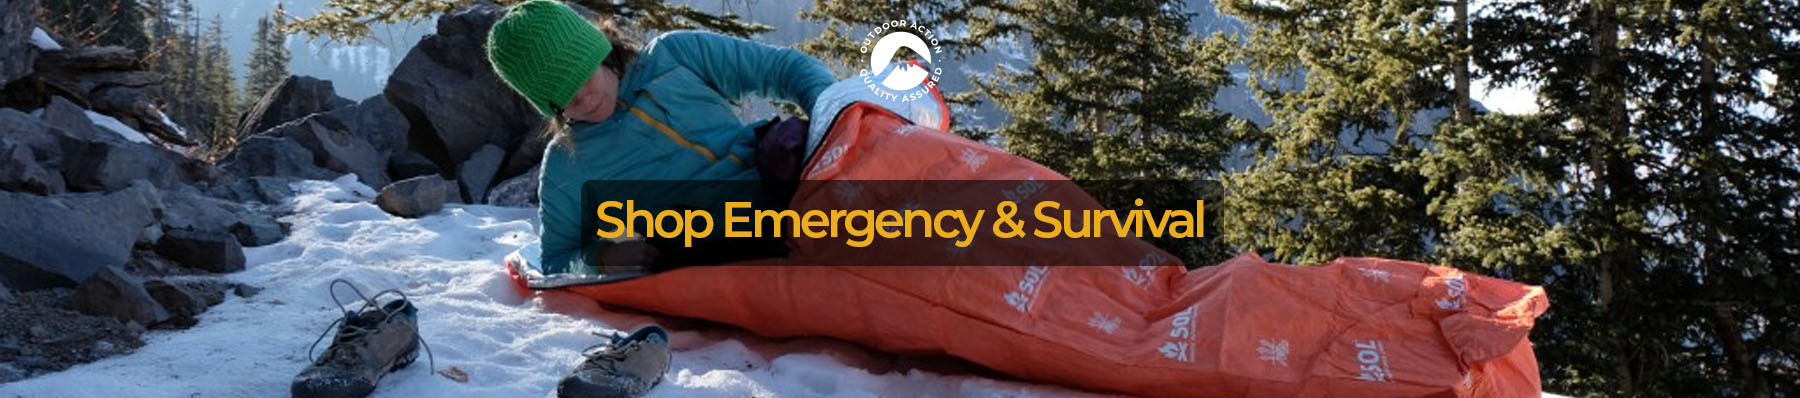 Shop Emergency & Survival online at Outdoor Action